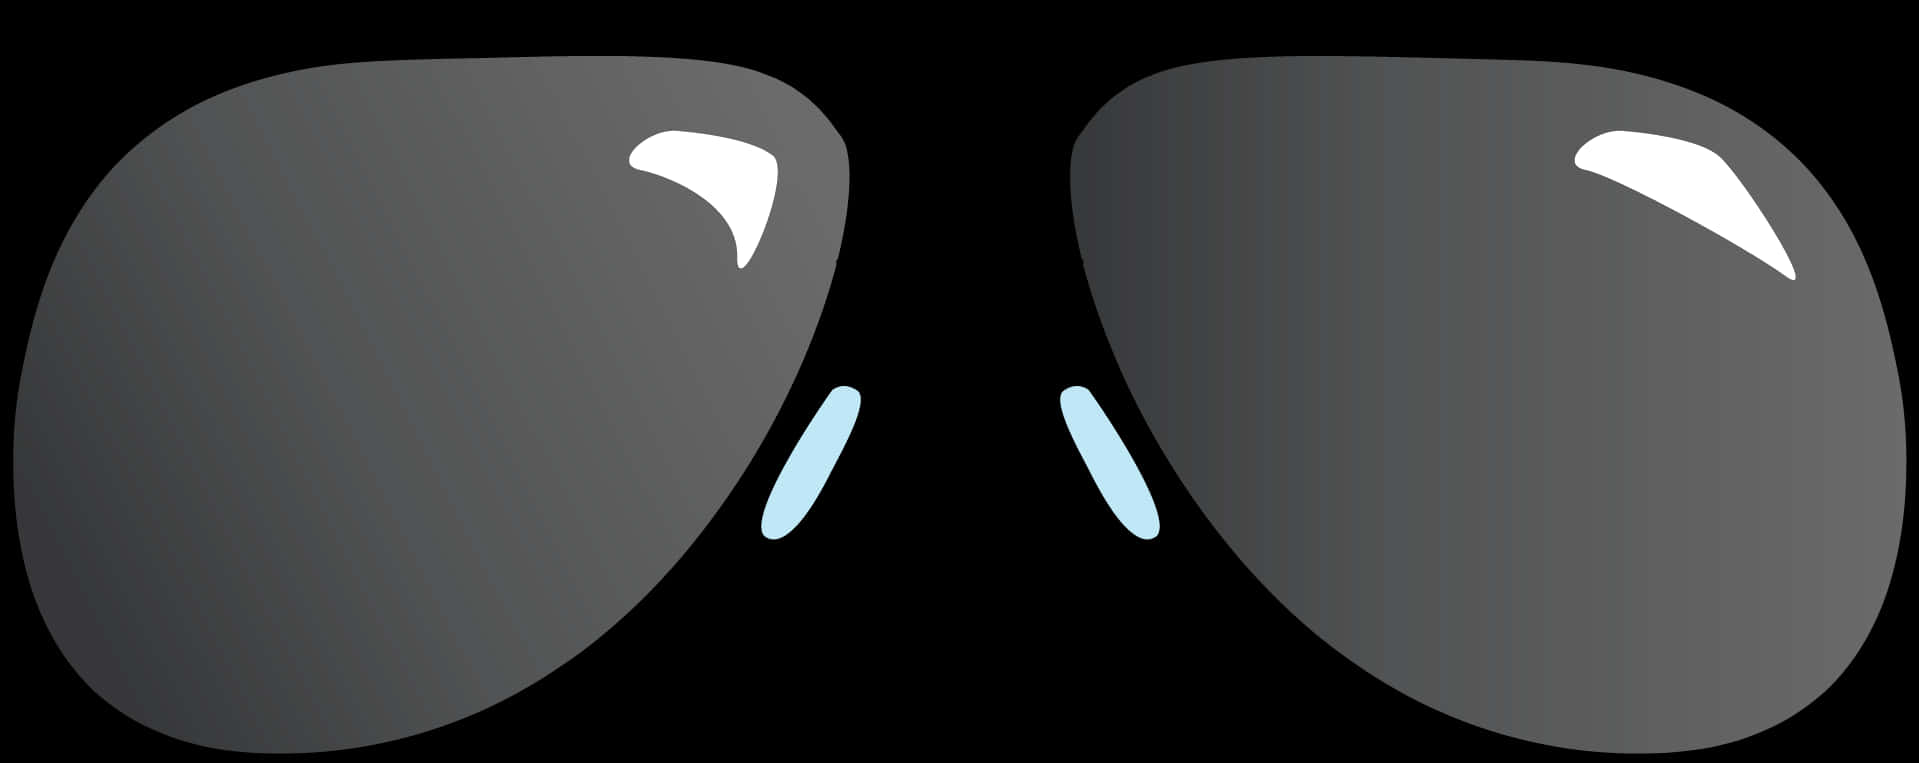 Stylized Sunglasses Graphic PNG